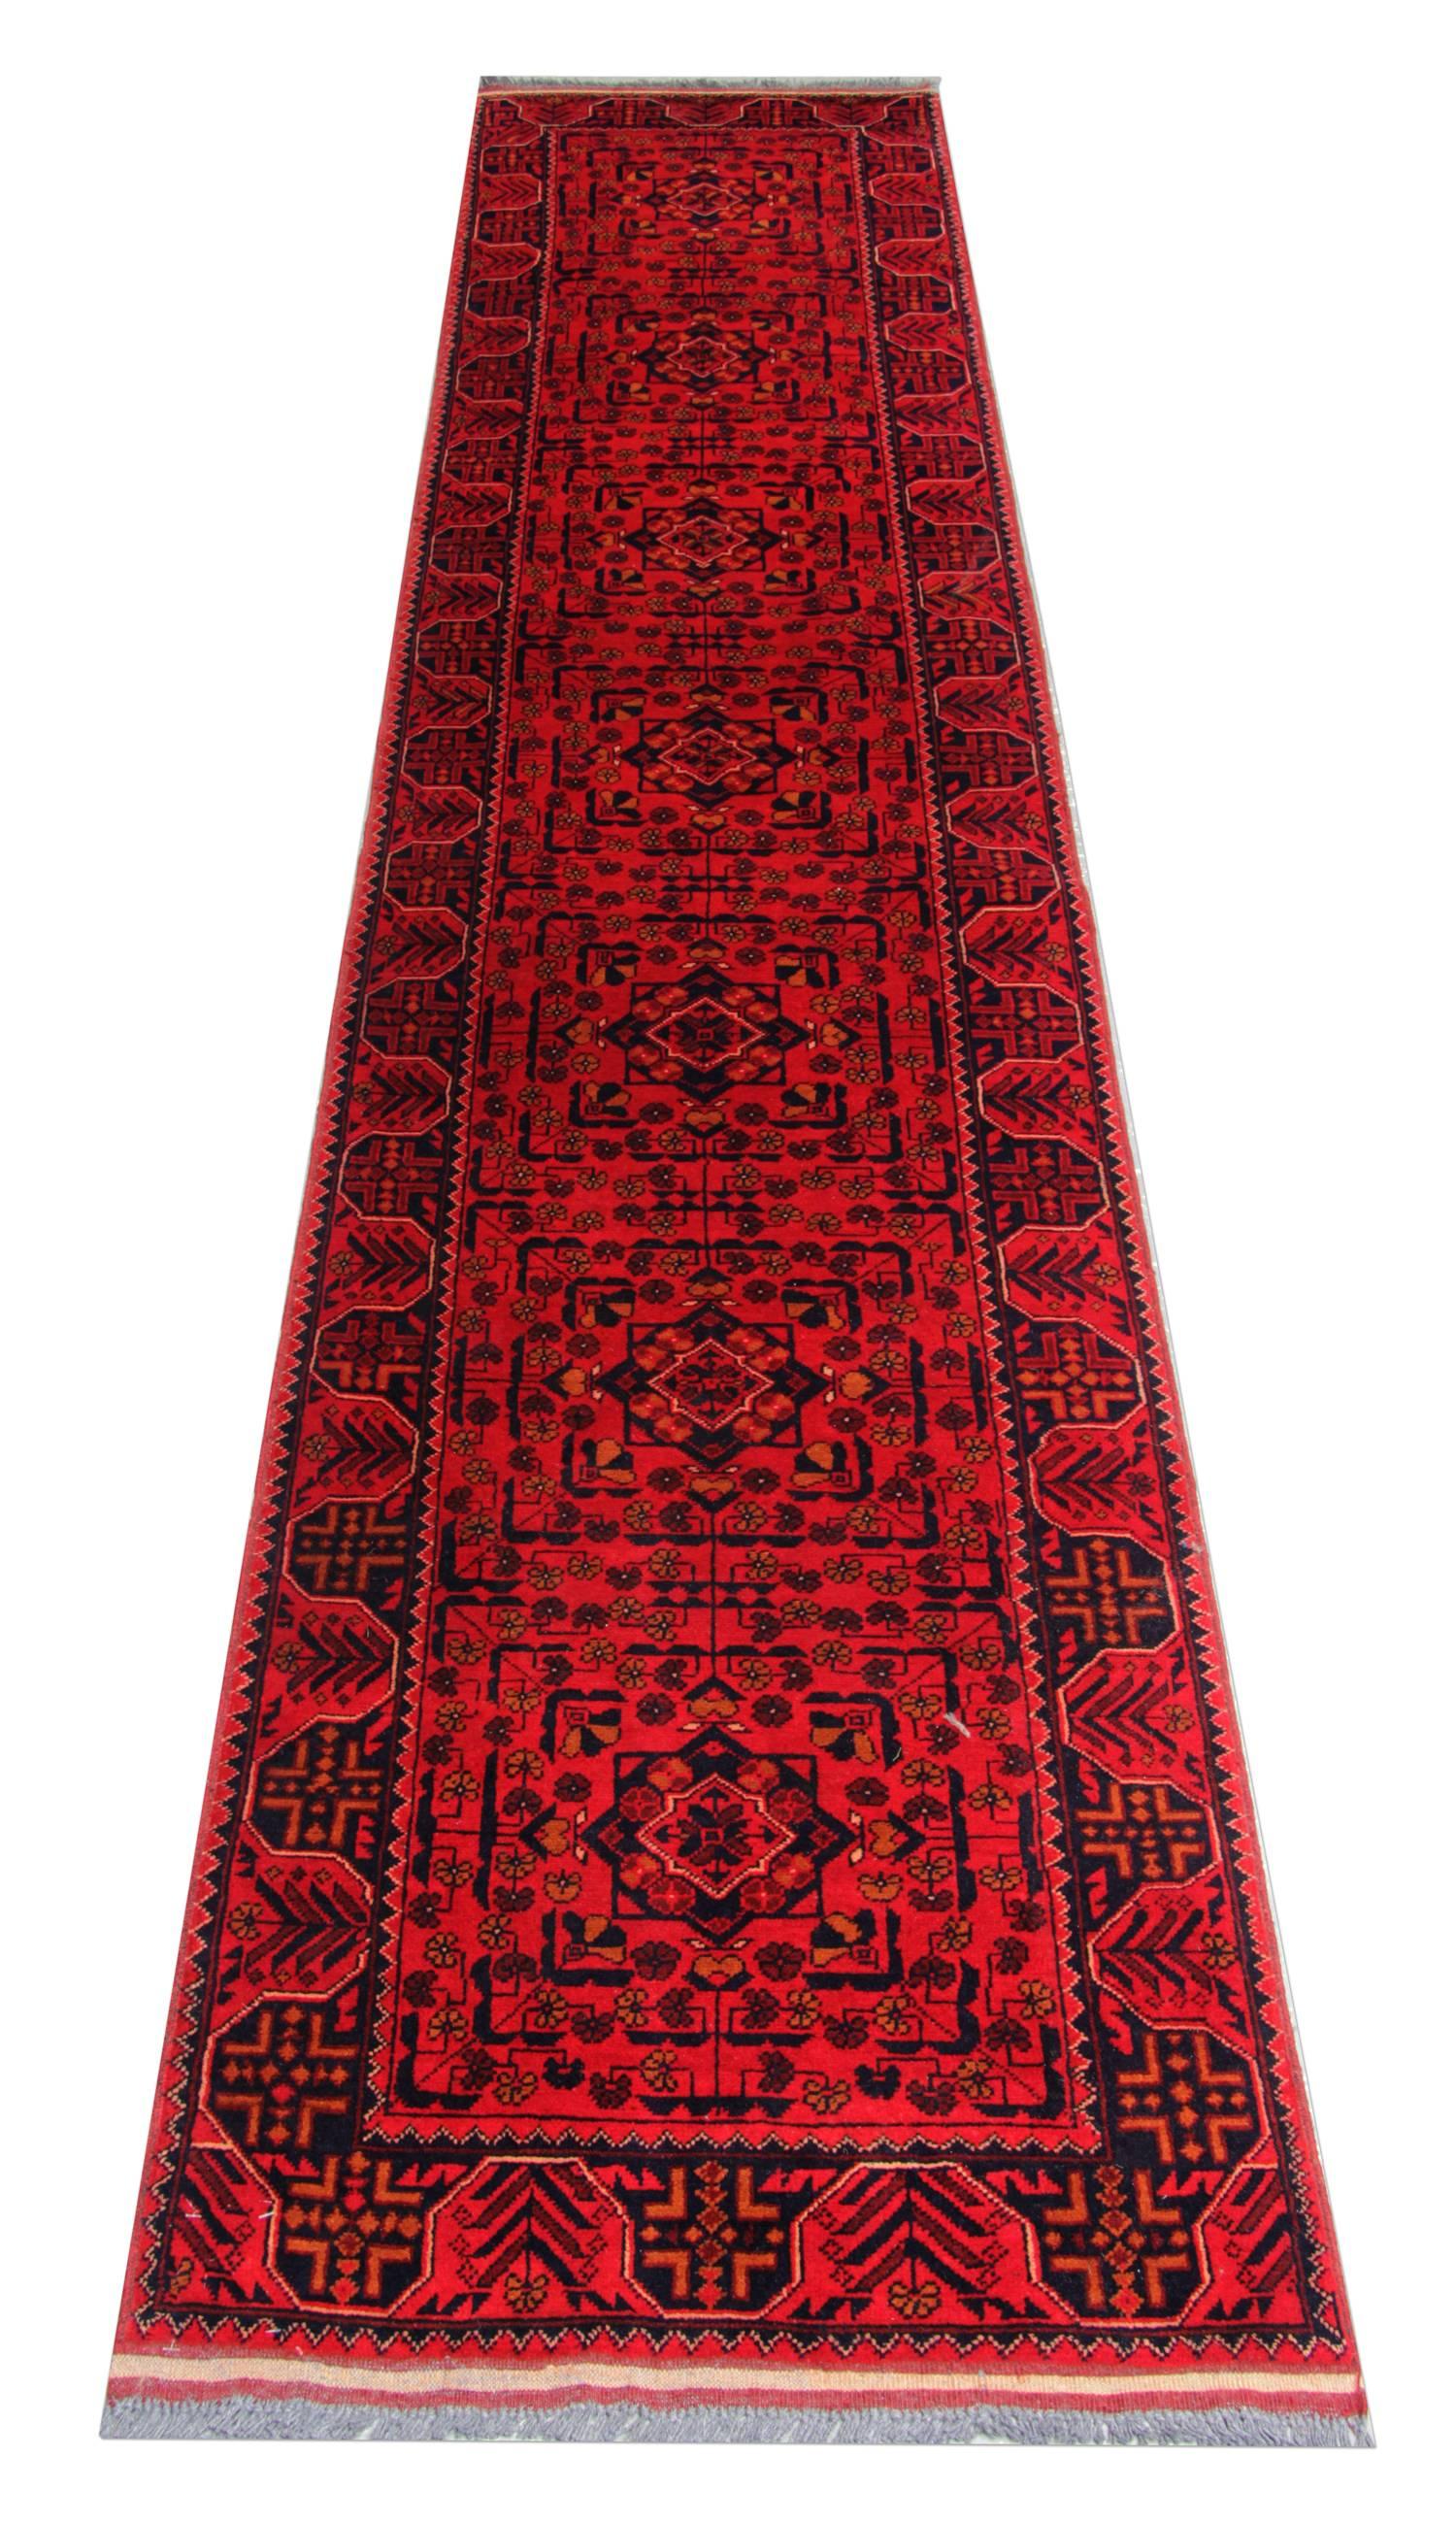 This impressive antique red rug is made from our master weavers in Afghanistan. These particular carpet runners are made with all natural vegetable dyes. The floral rug displays an all-over geometrical rug pattern. This woven rug also has an